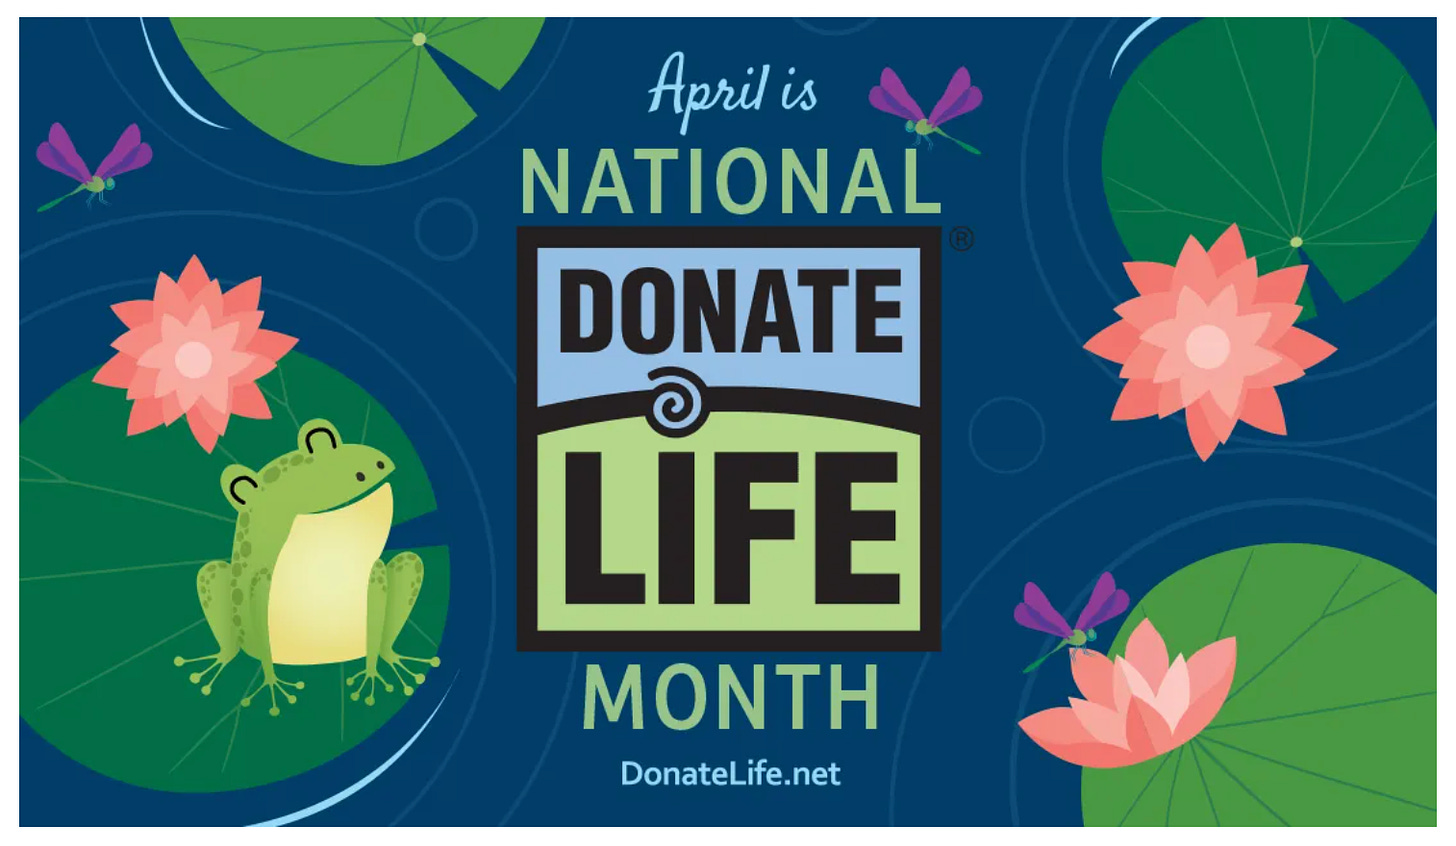 Graphic image celebrating April as National Donate Life Month